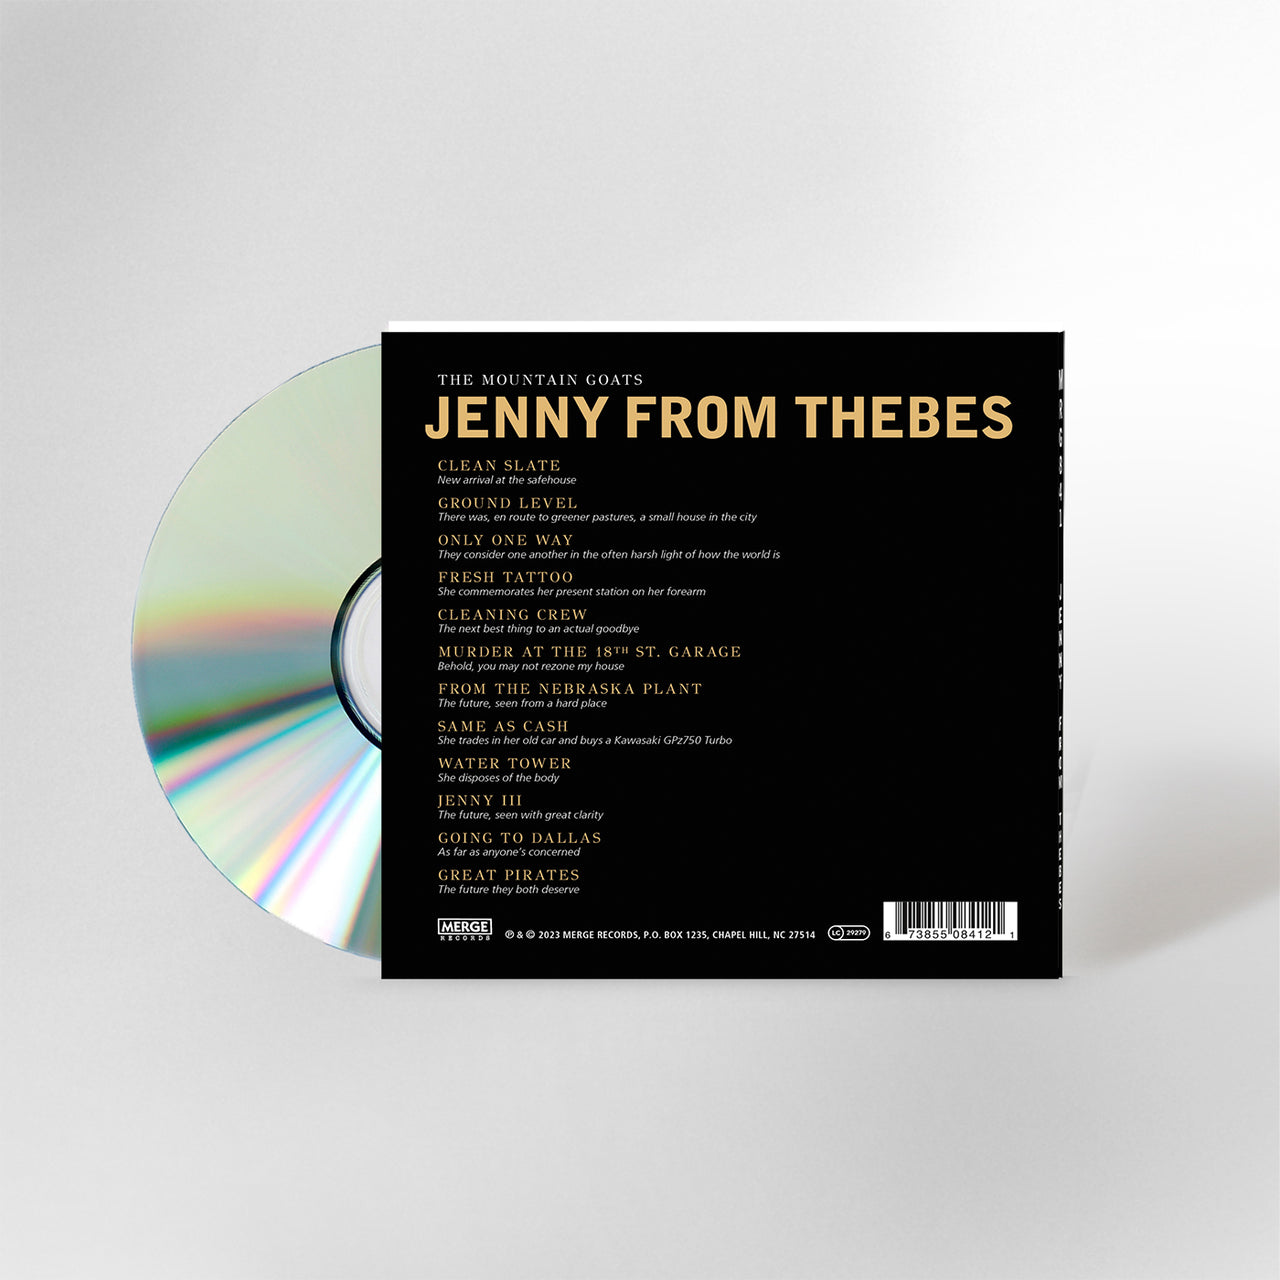 The Mountain Goats: Jenny From Thebes CD